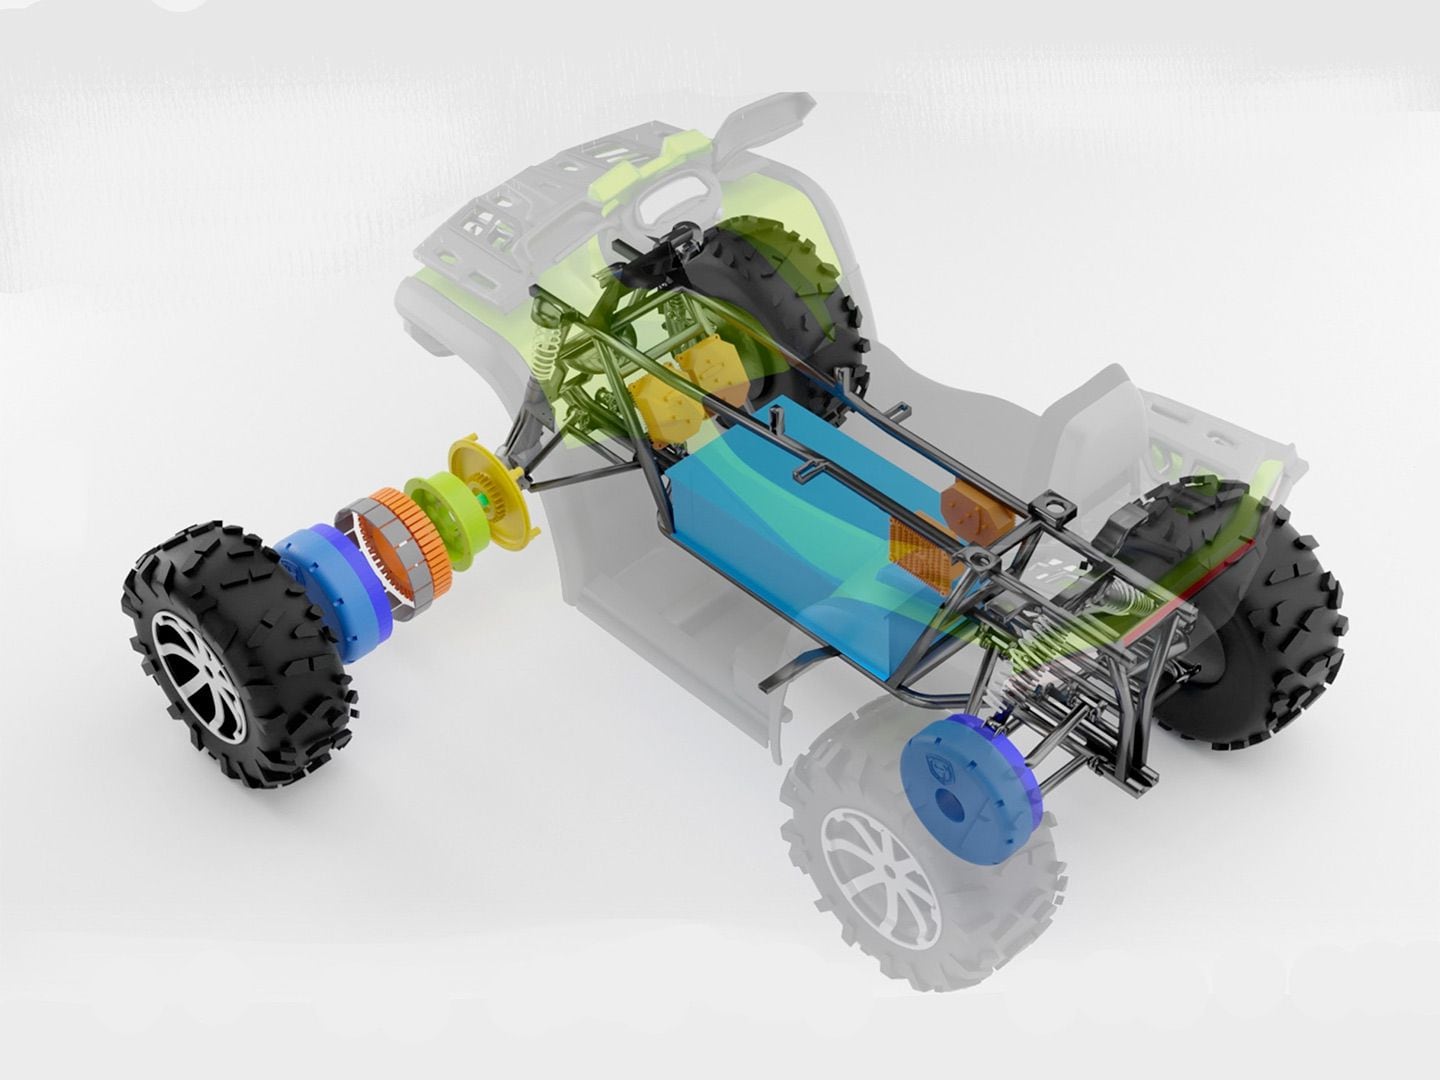 The Tachyon is driven by one motor per corner, giving it 155 lb.-ft. of torque at each wheel.